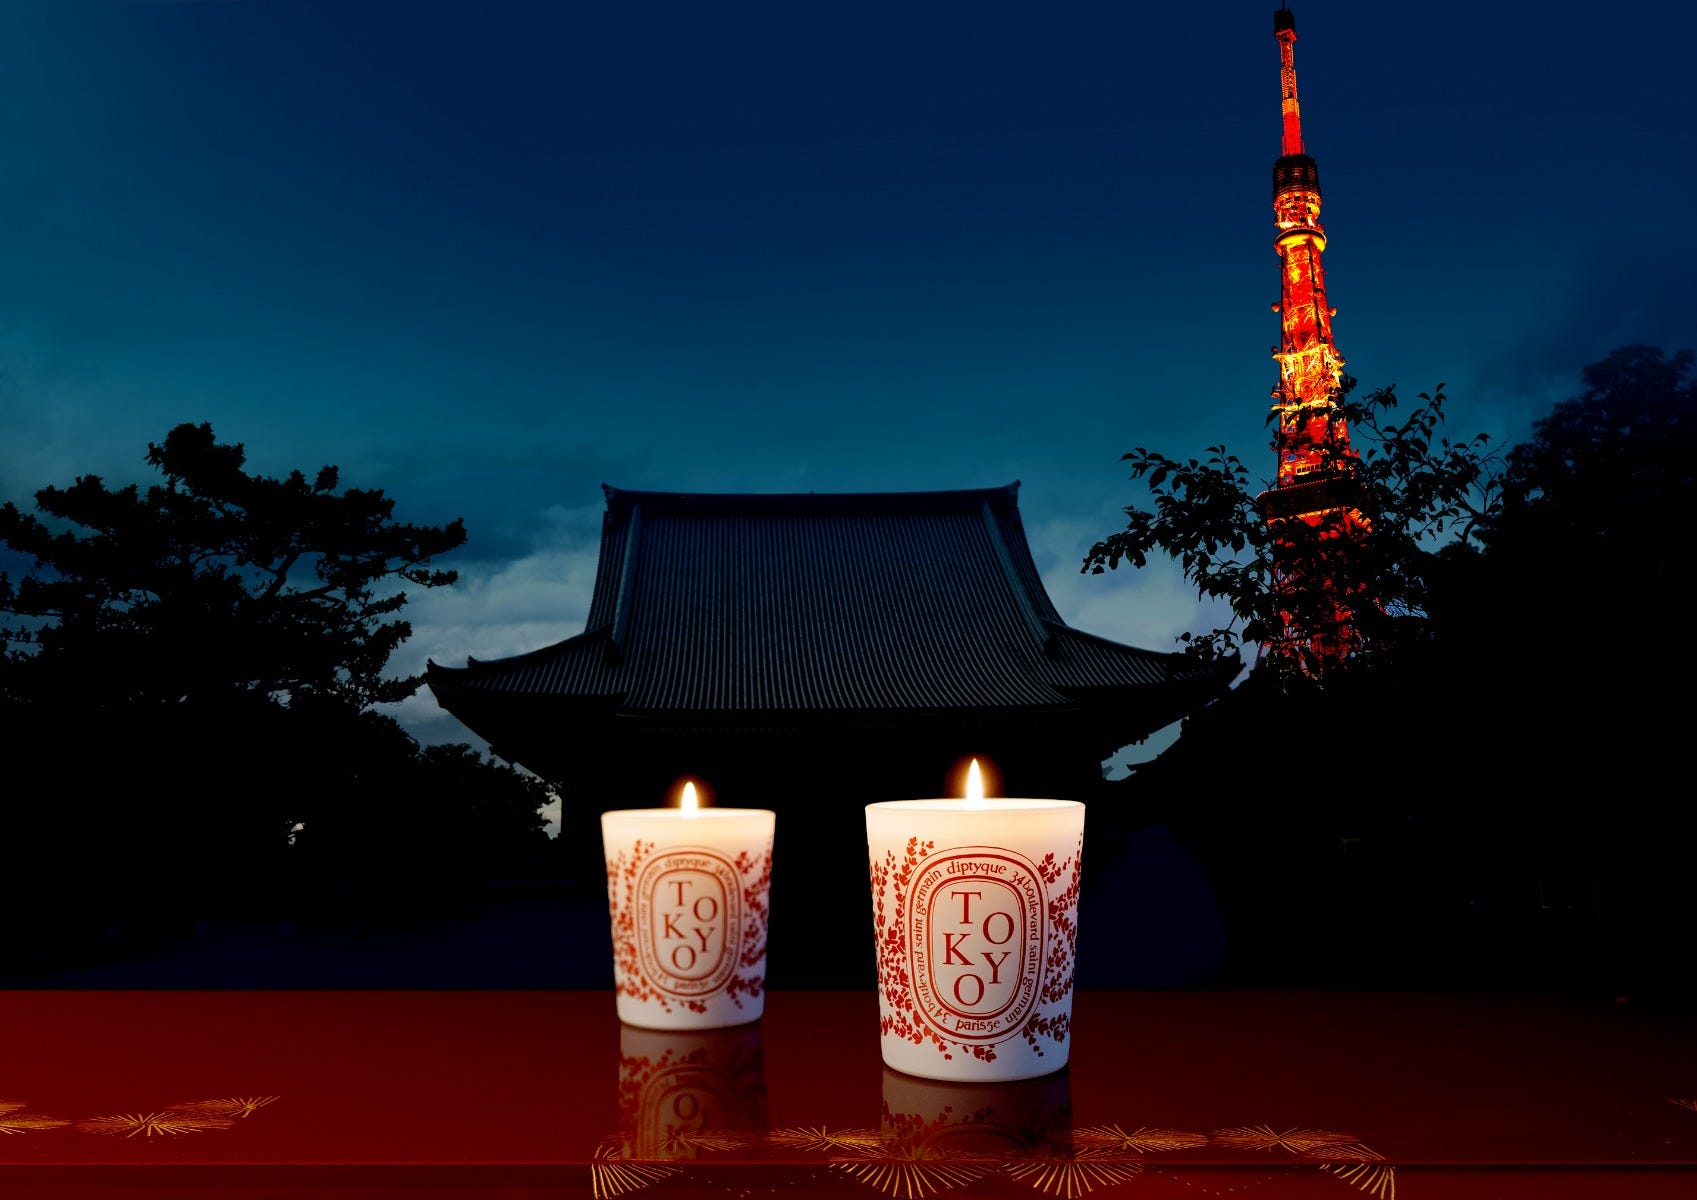 TOKYO CANDLE 2021